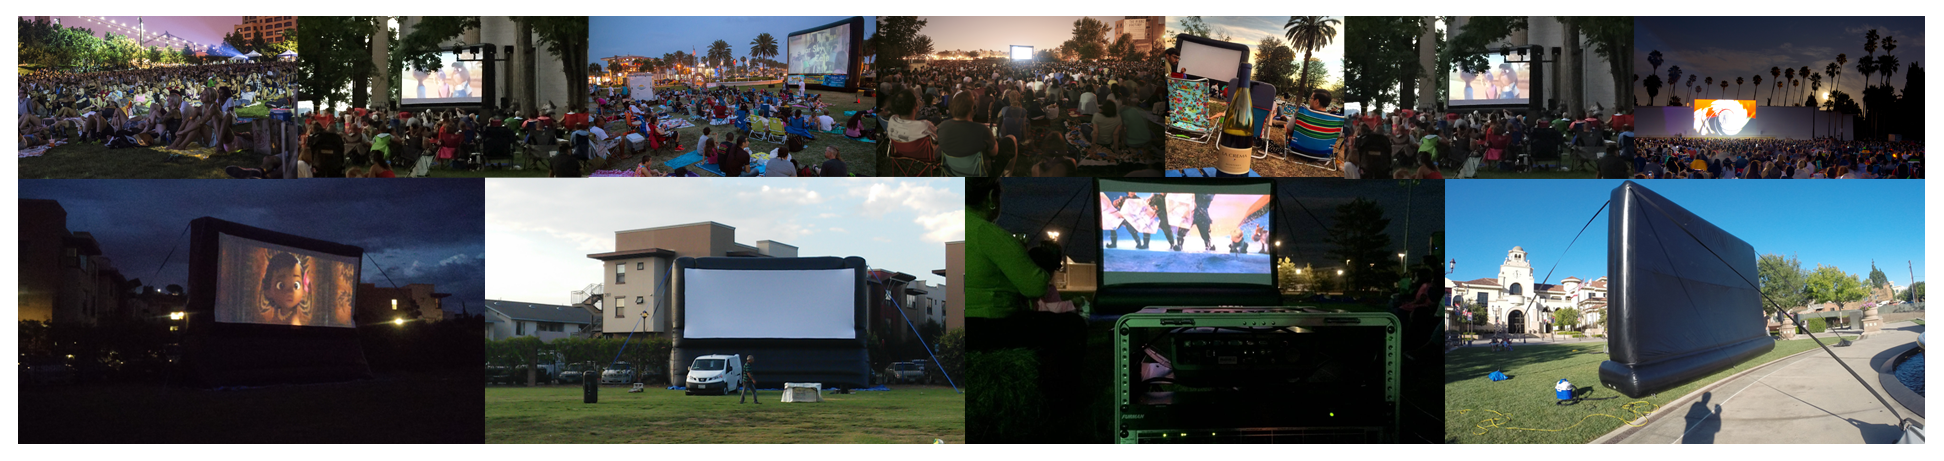 field and park inflatable movie screen rental